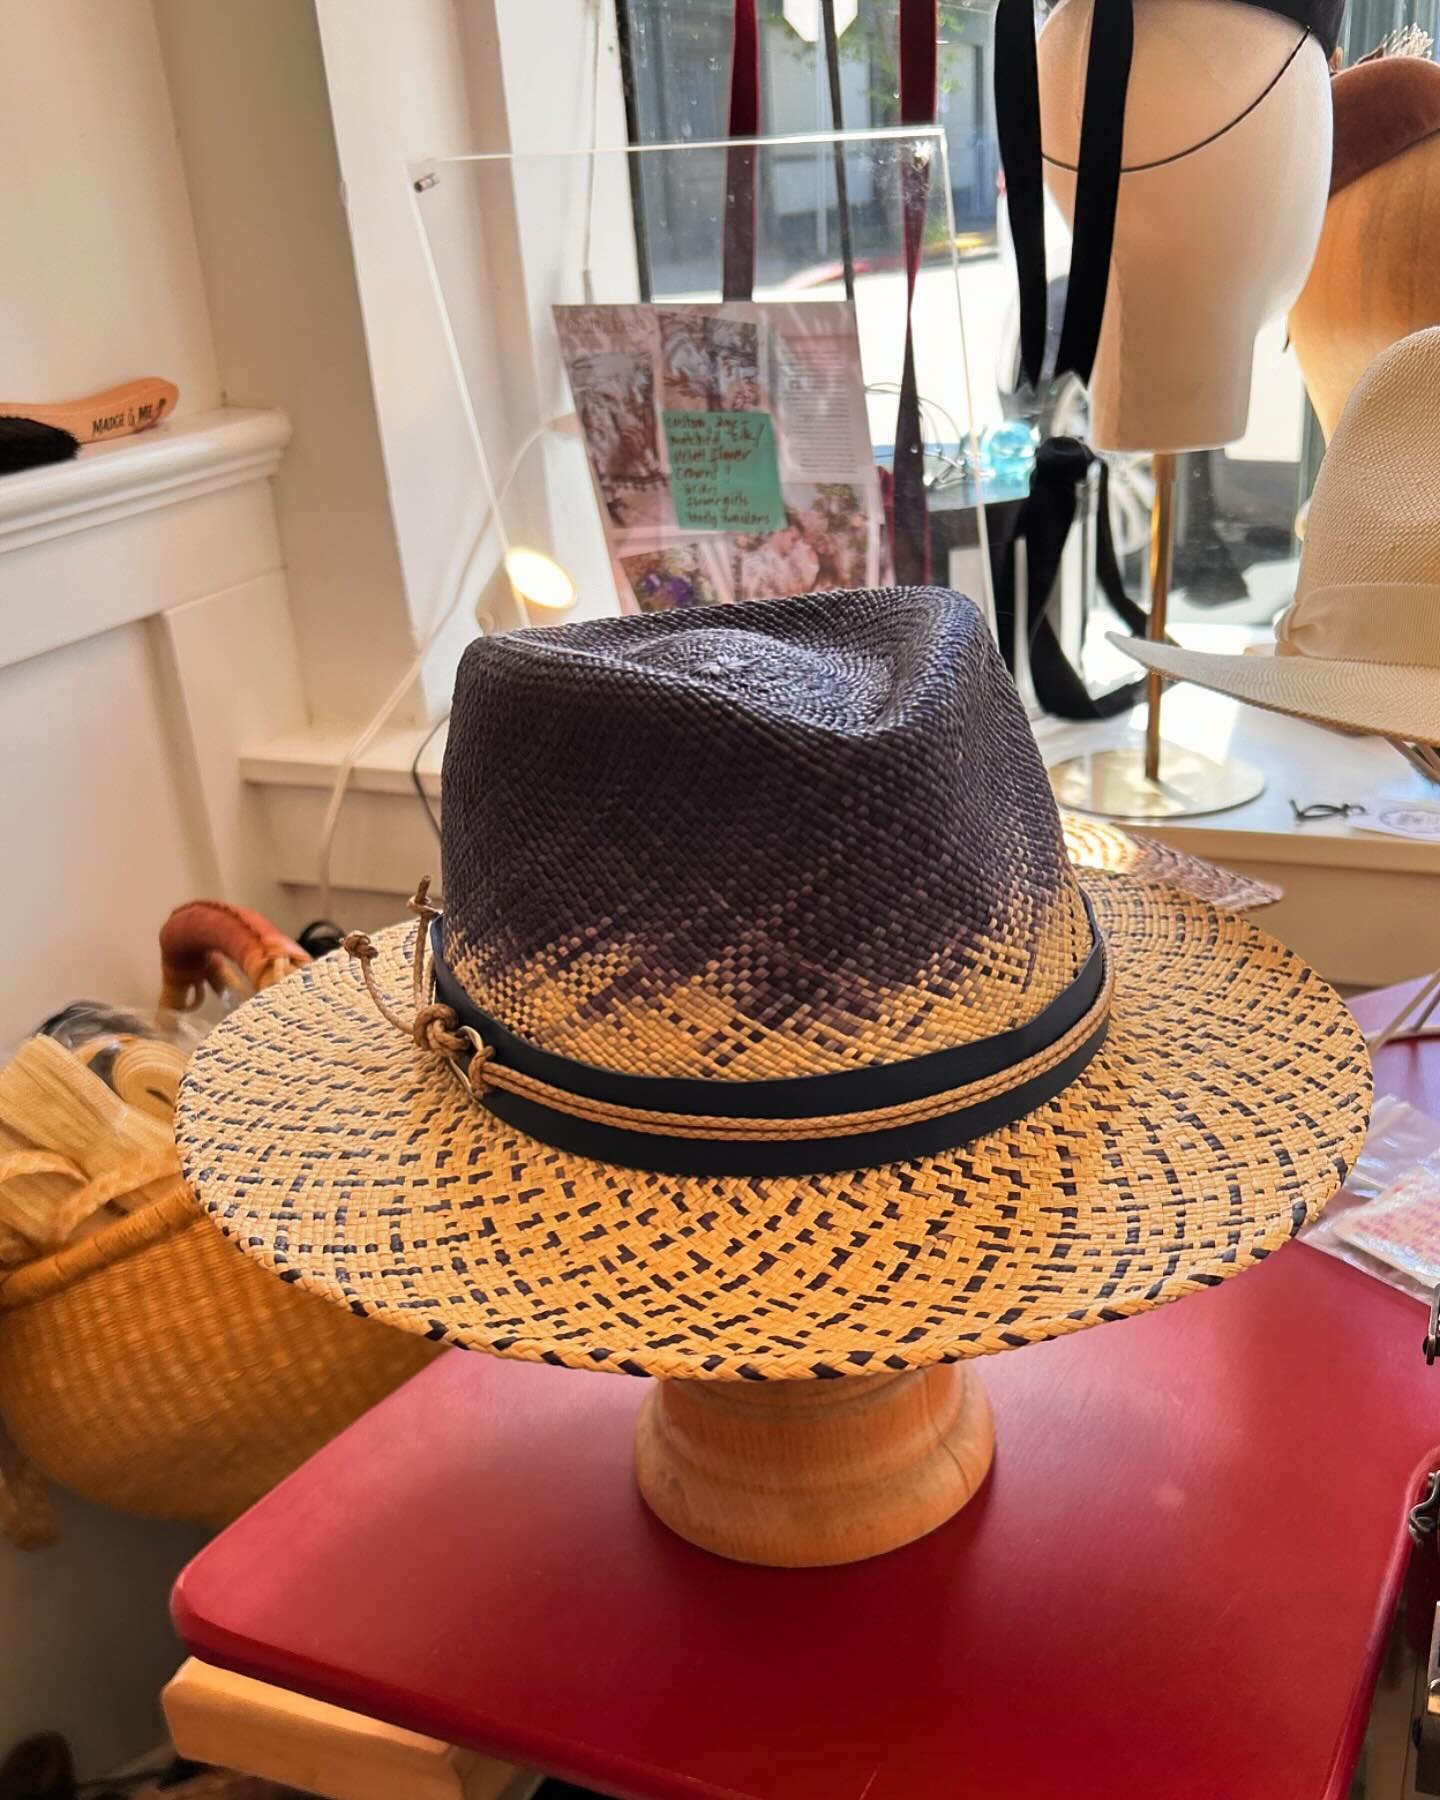 Gift yourself a summer hat! Made to fit your style, personality and your noggin!
#handmadehat #hatshop #madeinmarin #shopmarin #shopsananselmo